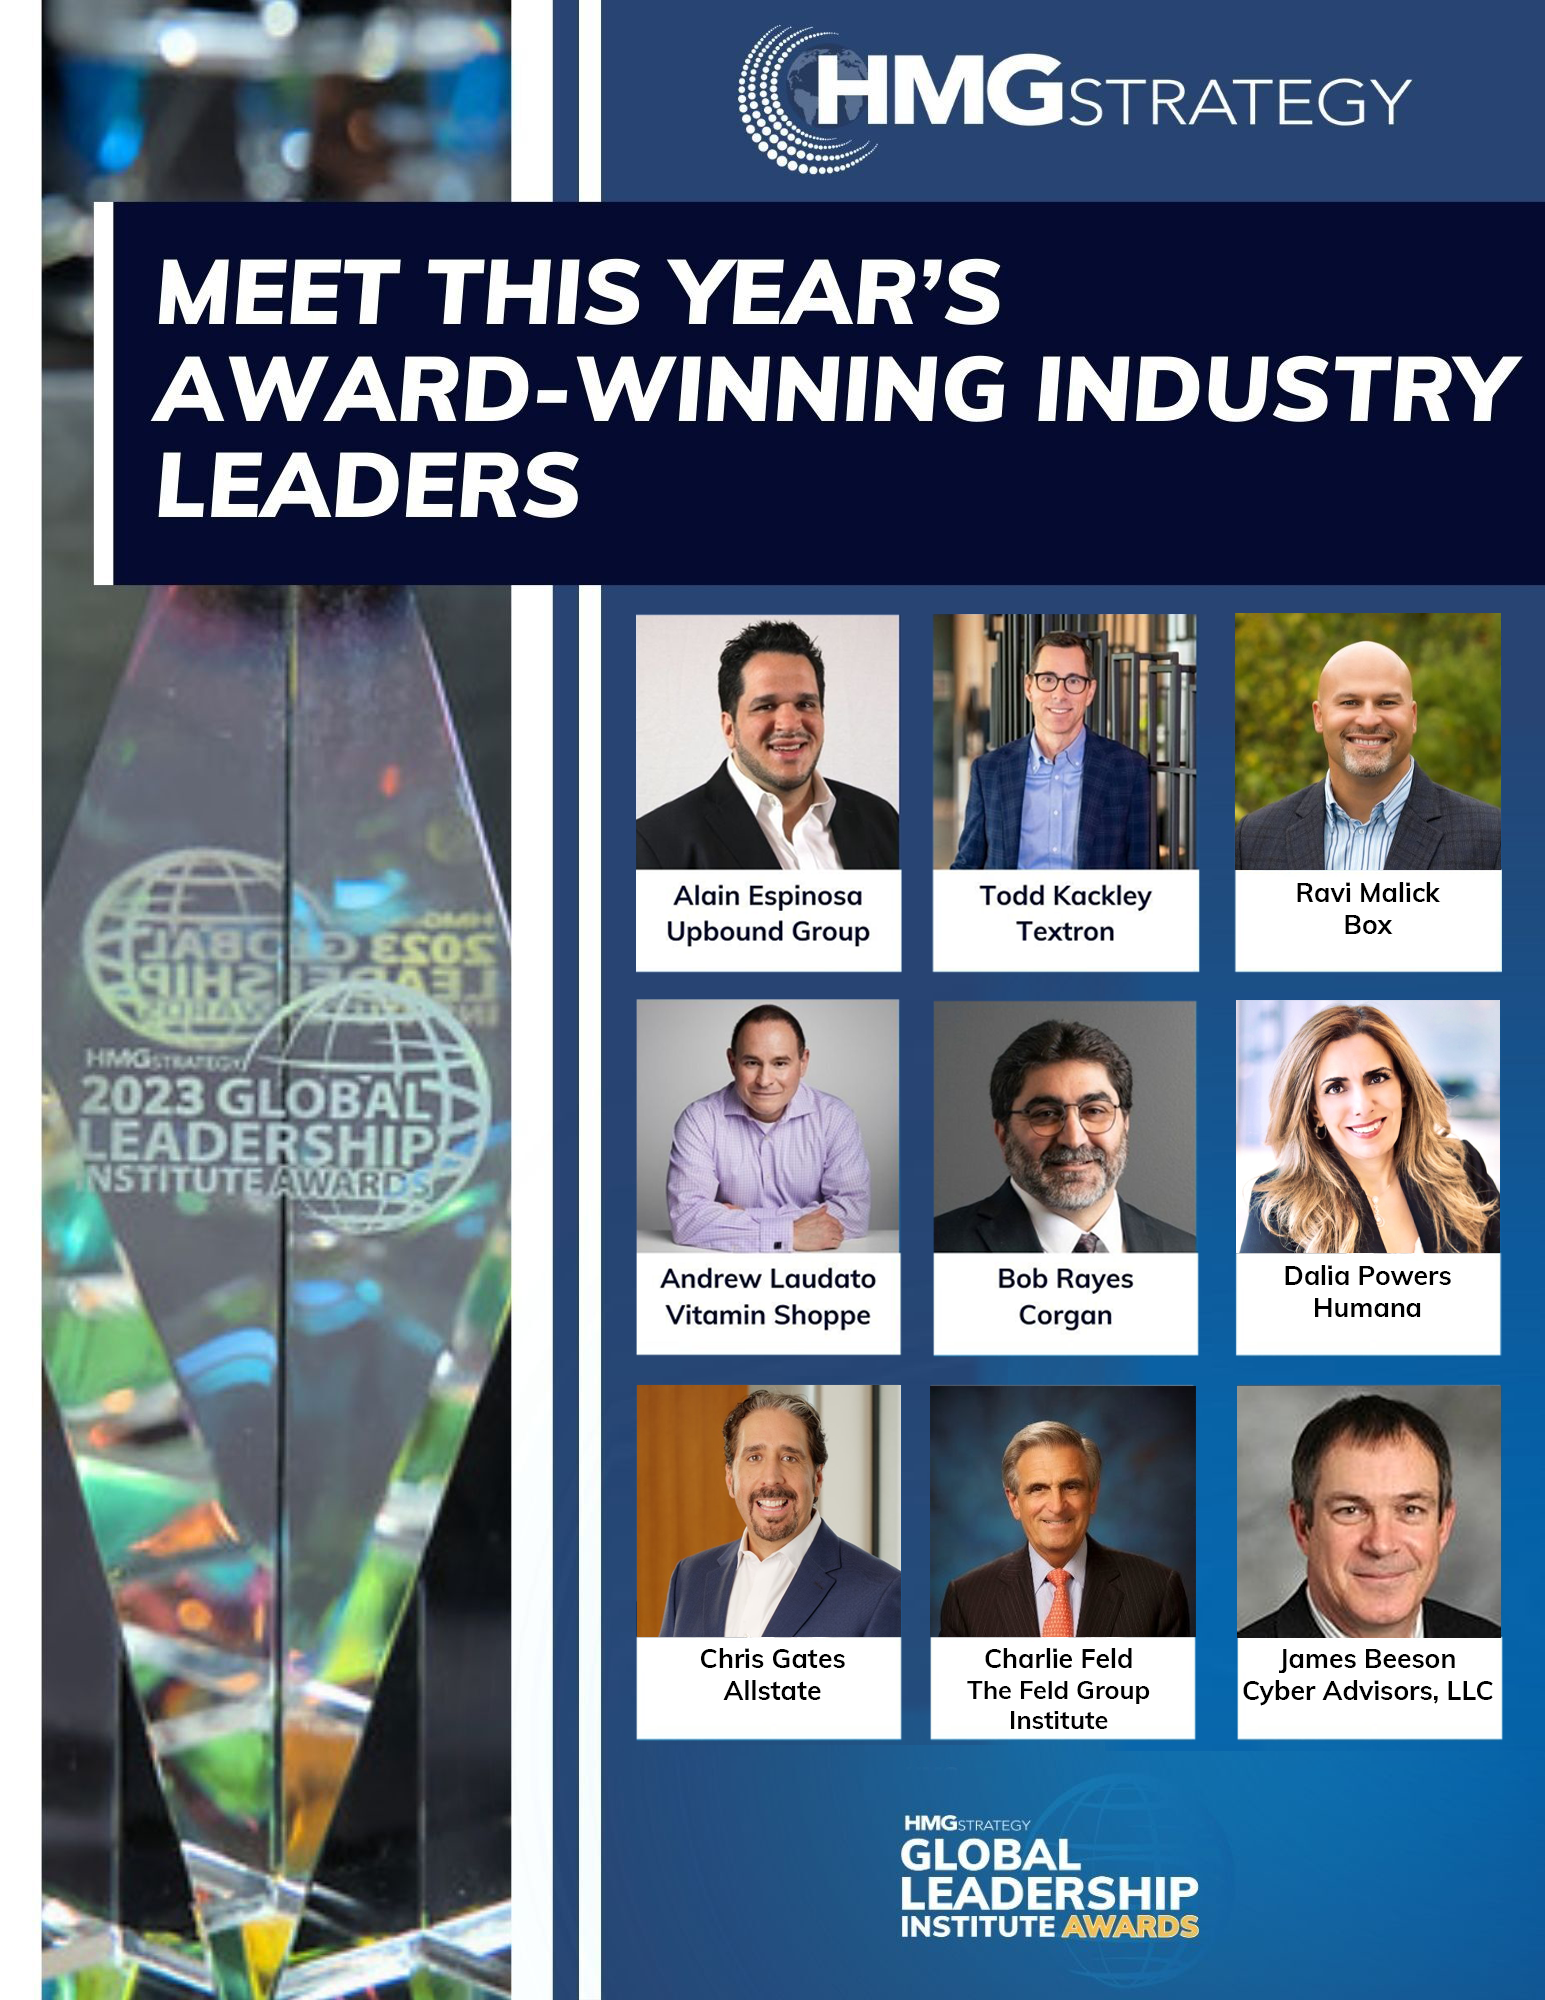 CIO Leadership: Celebrating Charlie Feld and Other Recipients of HMG Strategy’s Global Leadership Institute Awards at the 15th Annual Dallas C-Level Technology Leadership Summit on April 2